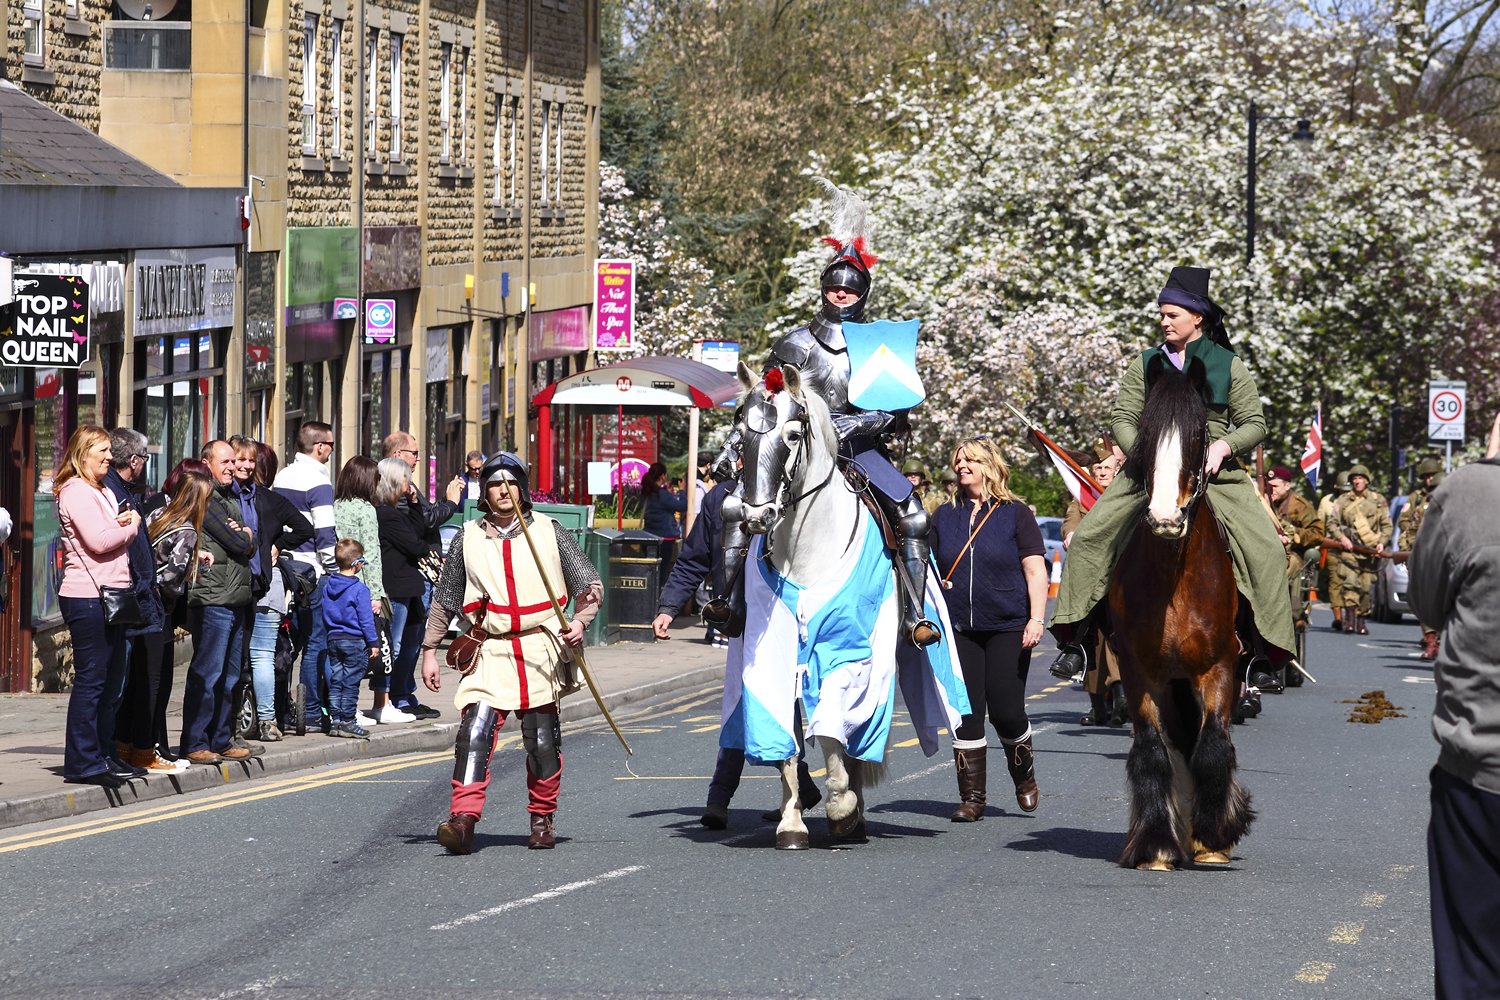 St George's Day parade, Morley, Leeds, Yorkshire